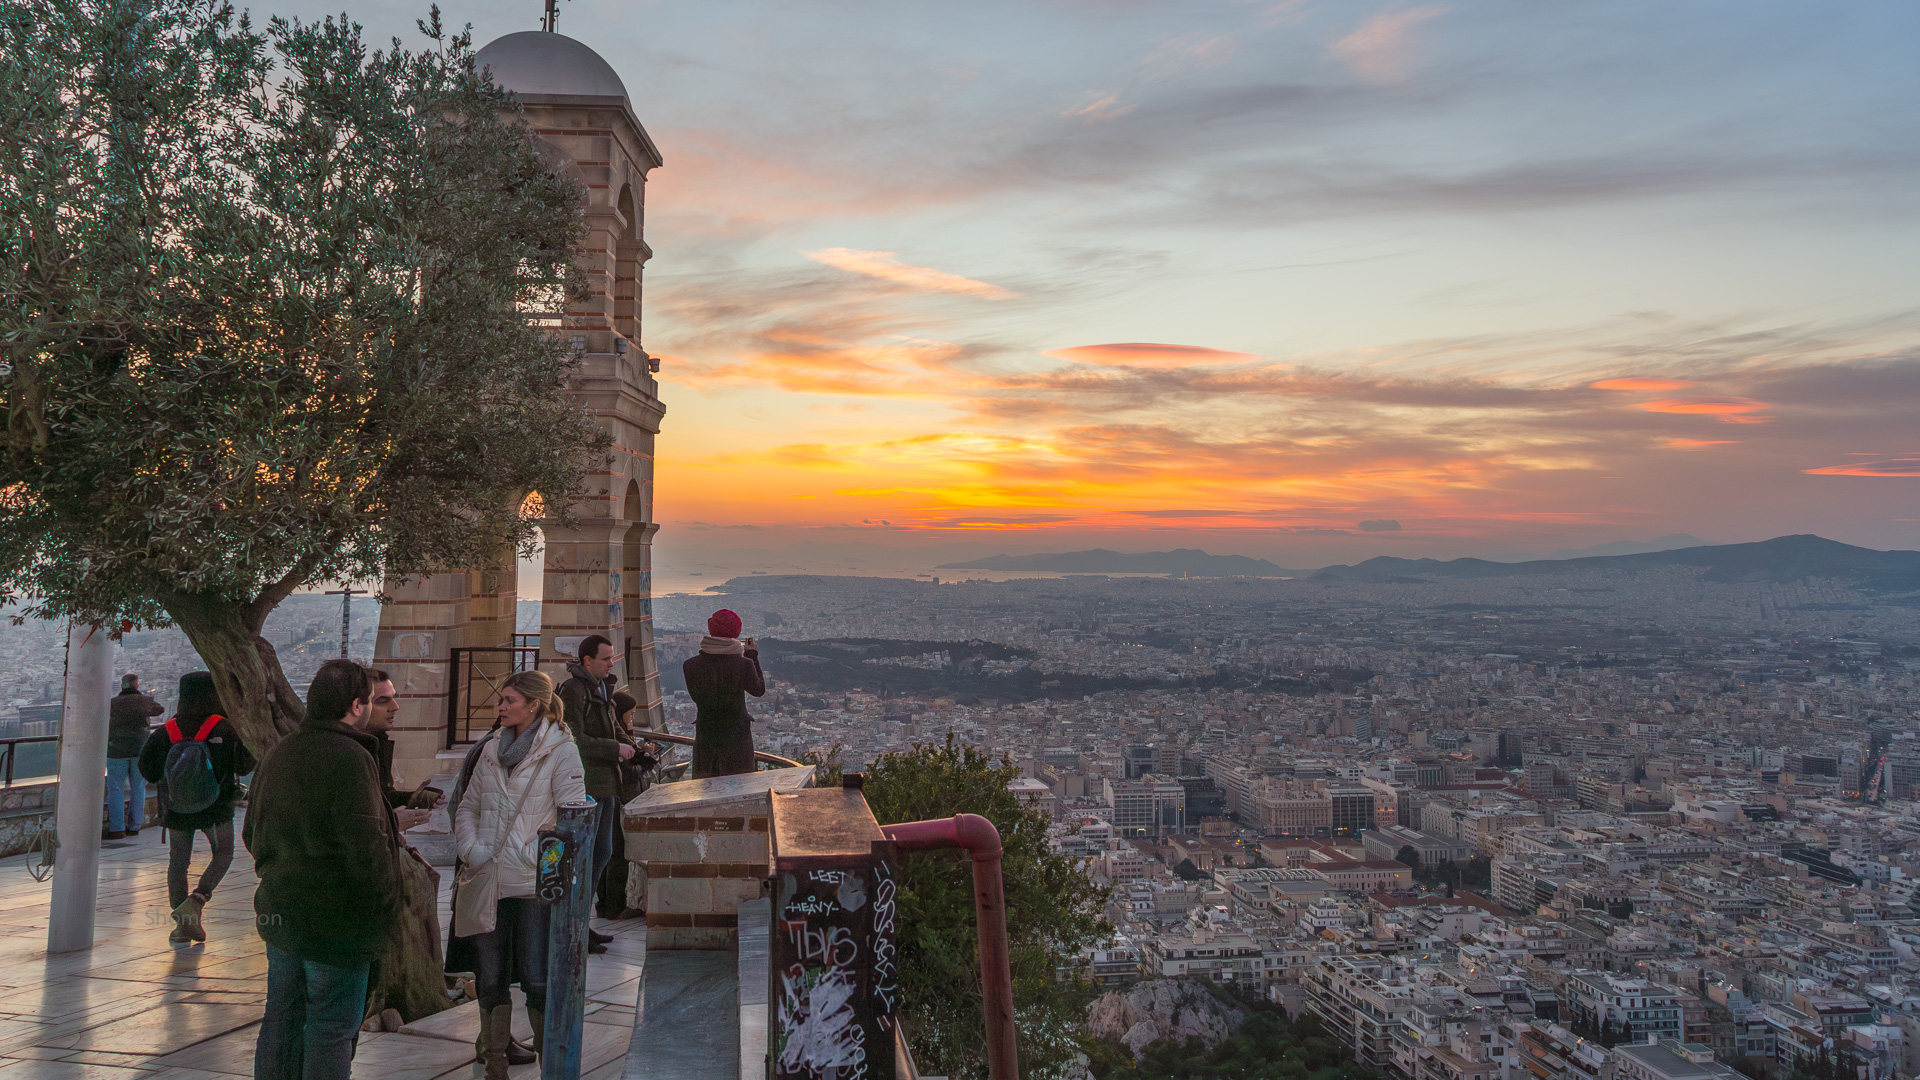 to the left, a stone observation deck with several people, a tree, and a bell tower; to the right, below, a city; the sky has an orange sunset